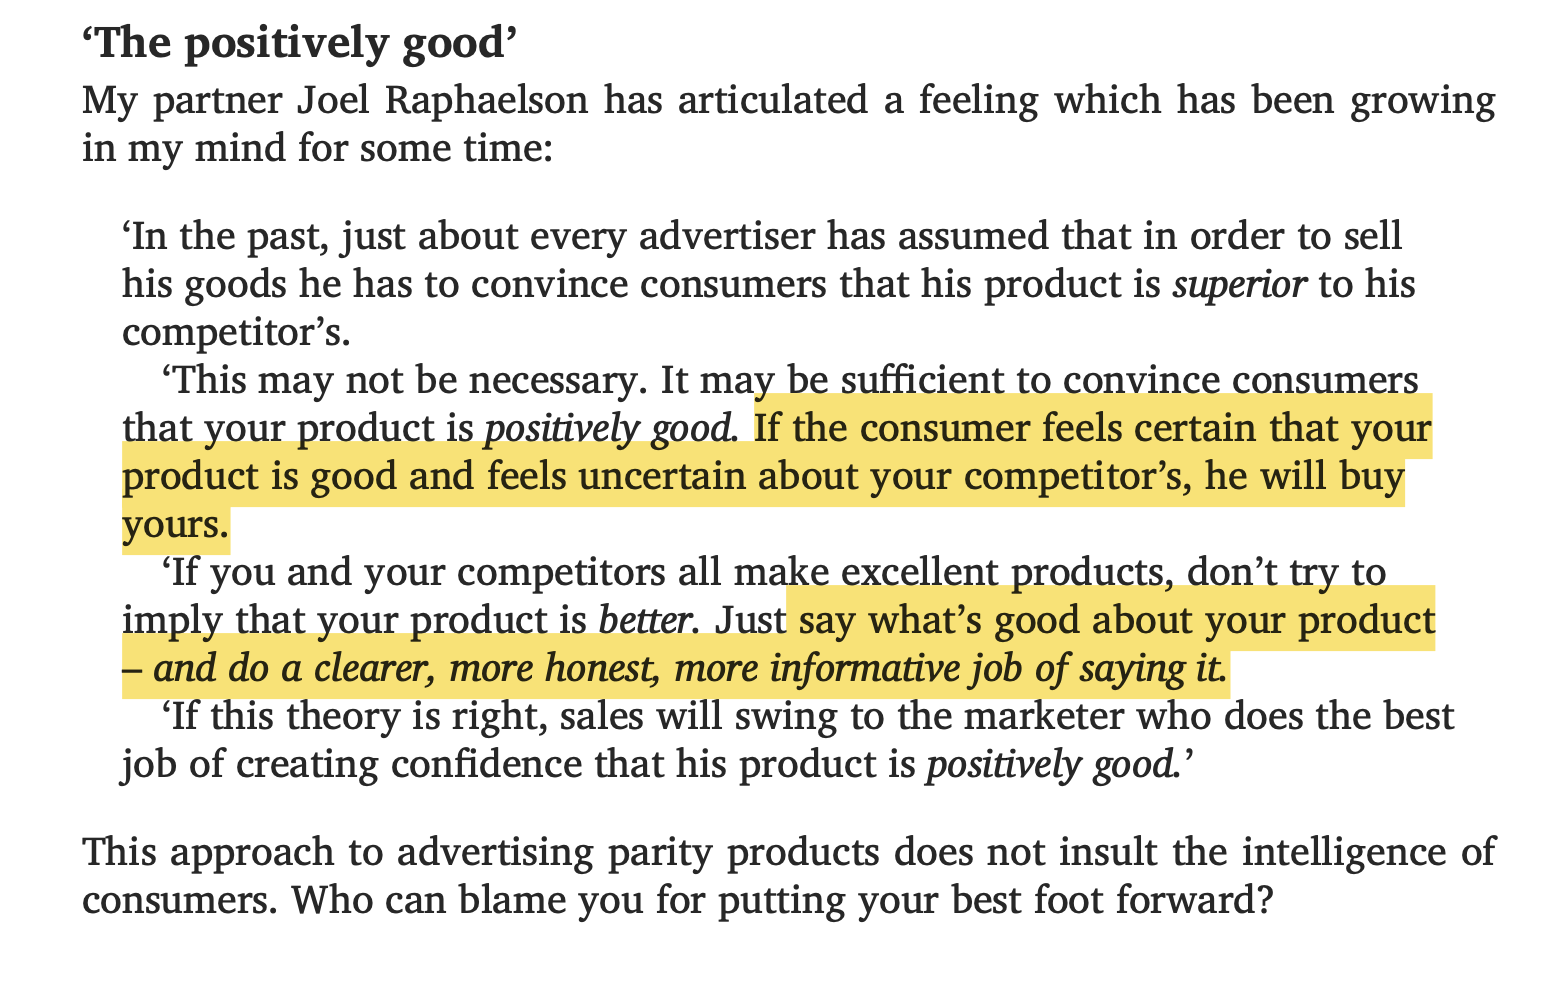 "The positively good”: an excerpt from ‘Ogilvy on Advertising’.  “In the past, just about every advertiser has assumed that in order to sell his goods he has to convince consumers that his product is *superior* to his competitor's.  “This may not be necessary. It may be sufficient to convince consumers that your product is *positively good*. If the consumer feels certain that your product is good and feels uncertain about your competitor's, he will buy yours.  “If you and your competitors all make excellent products, don’t try to imply that your product is better. Just say what’s good about your product — and do a clearer, more honest, more informative job of saying it.  “If this theory is right, sales will swing to the marketer who does the best job of creating confidence that his product is *positively good*.”  This approach to advertising parity products does not insult the intelligence of consumers. Who can blame you for putting your best foot forward?